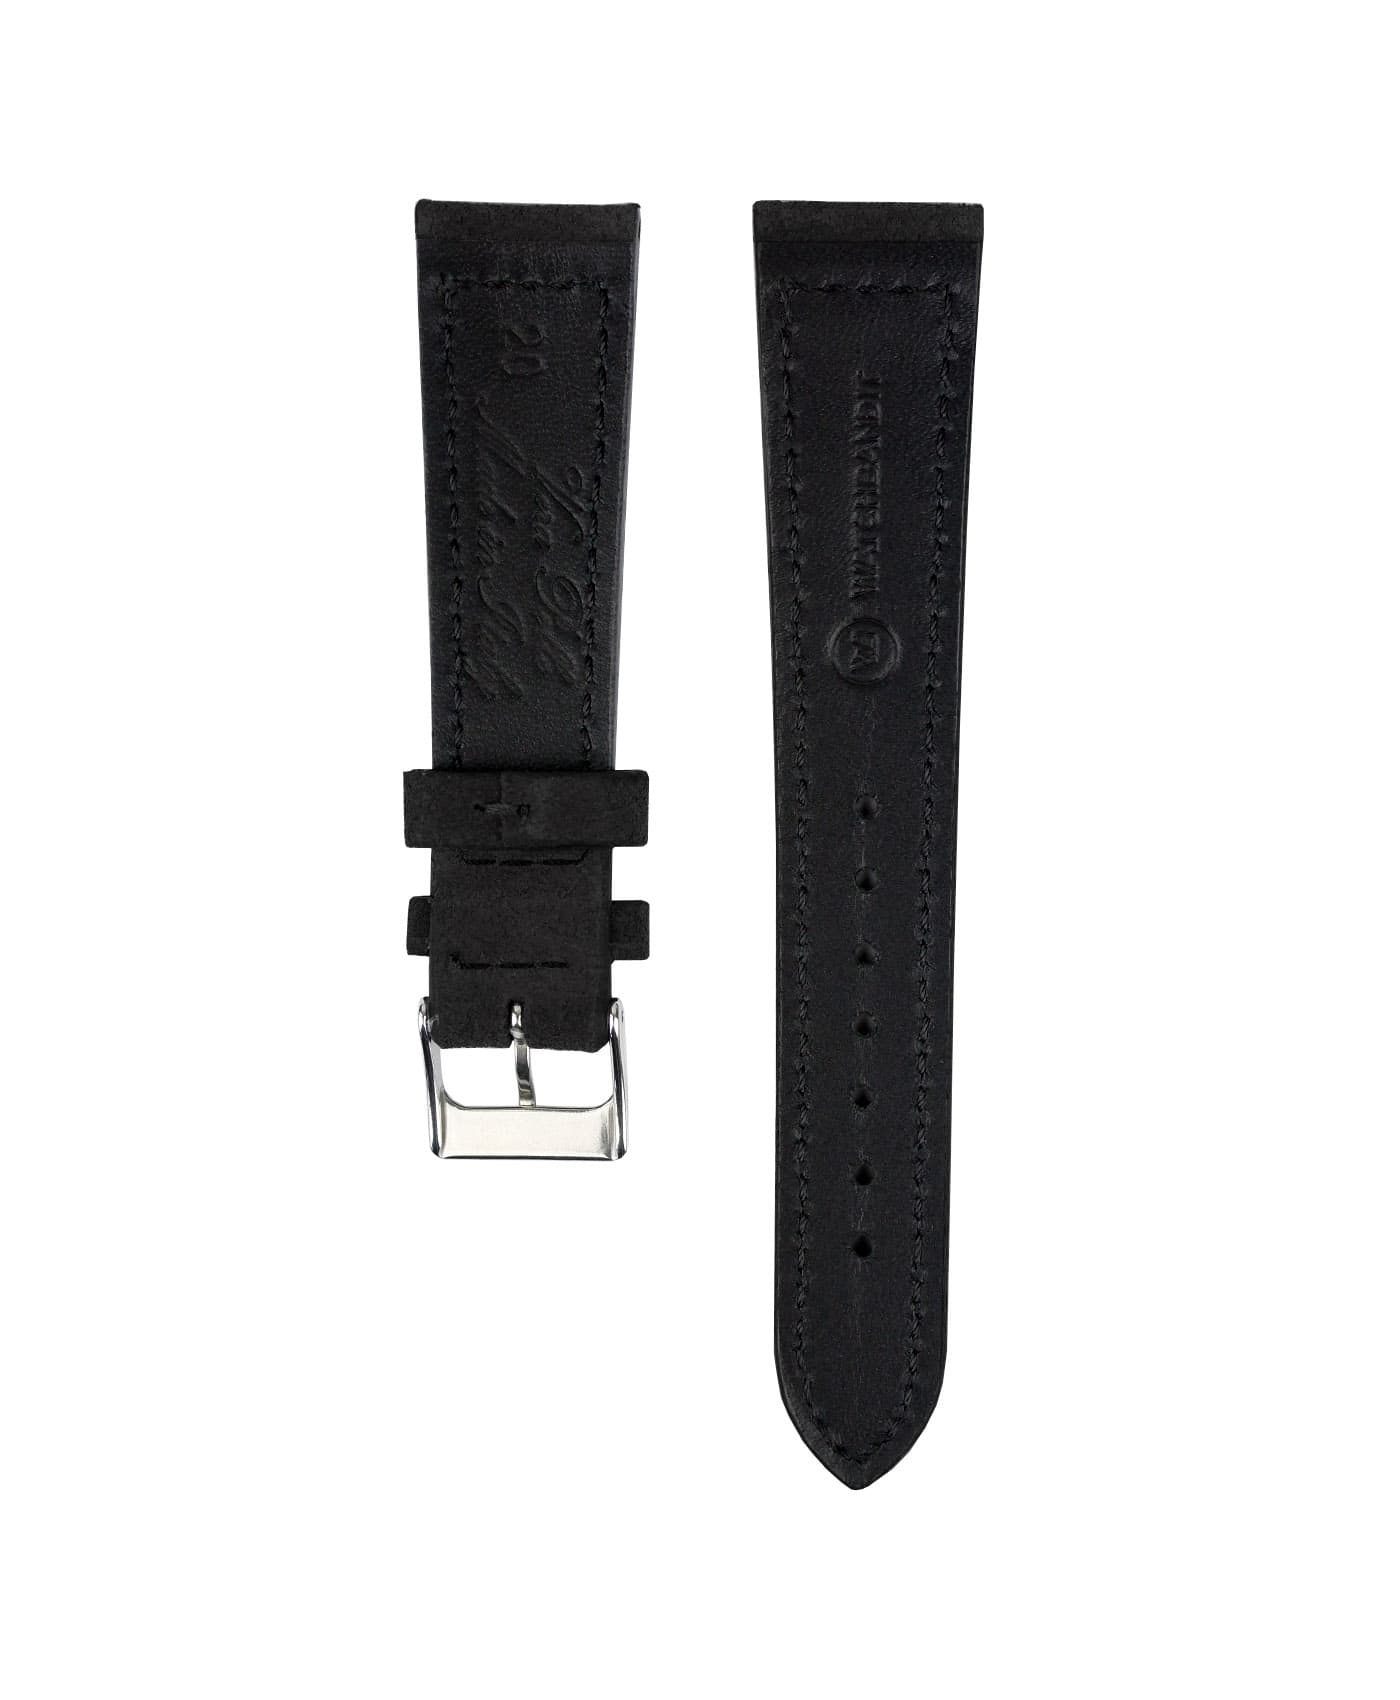 Suede leather strap with side seam_grey_back